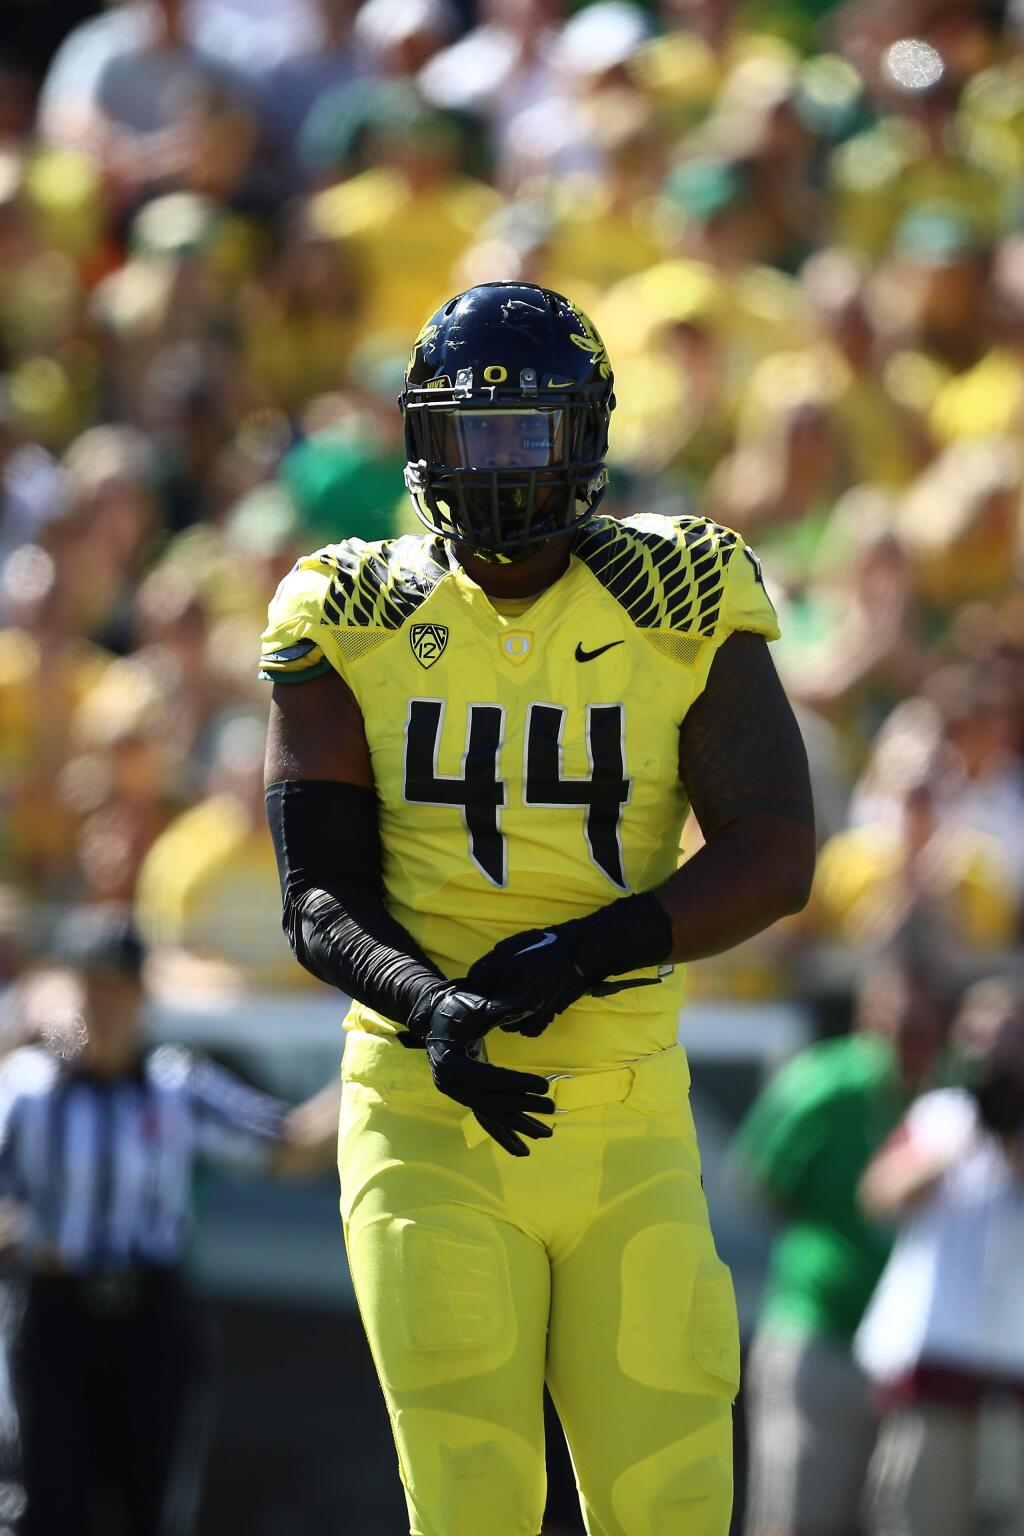 Oregon defensive lineman DeForest Buckner (44) is seen during the first half of an game against Georgia State, Saturday, Sept. 19, 2015, in Eugene, Ore. (AP Photo/Ryan Kang)